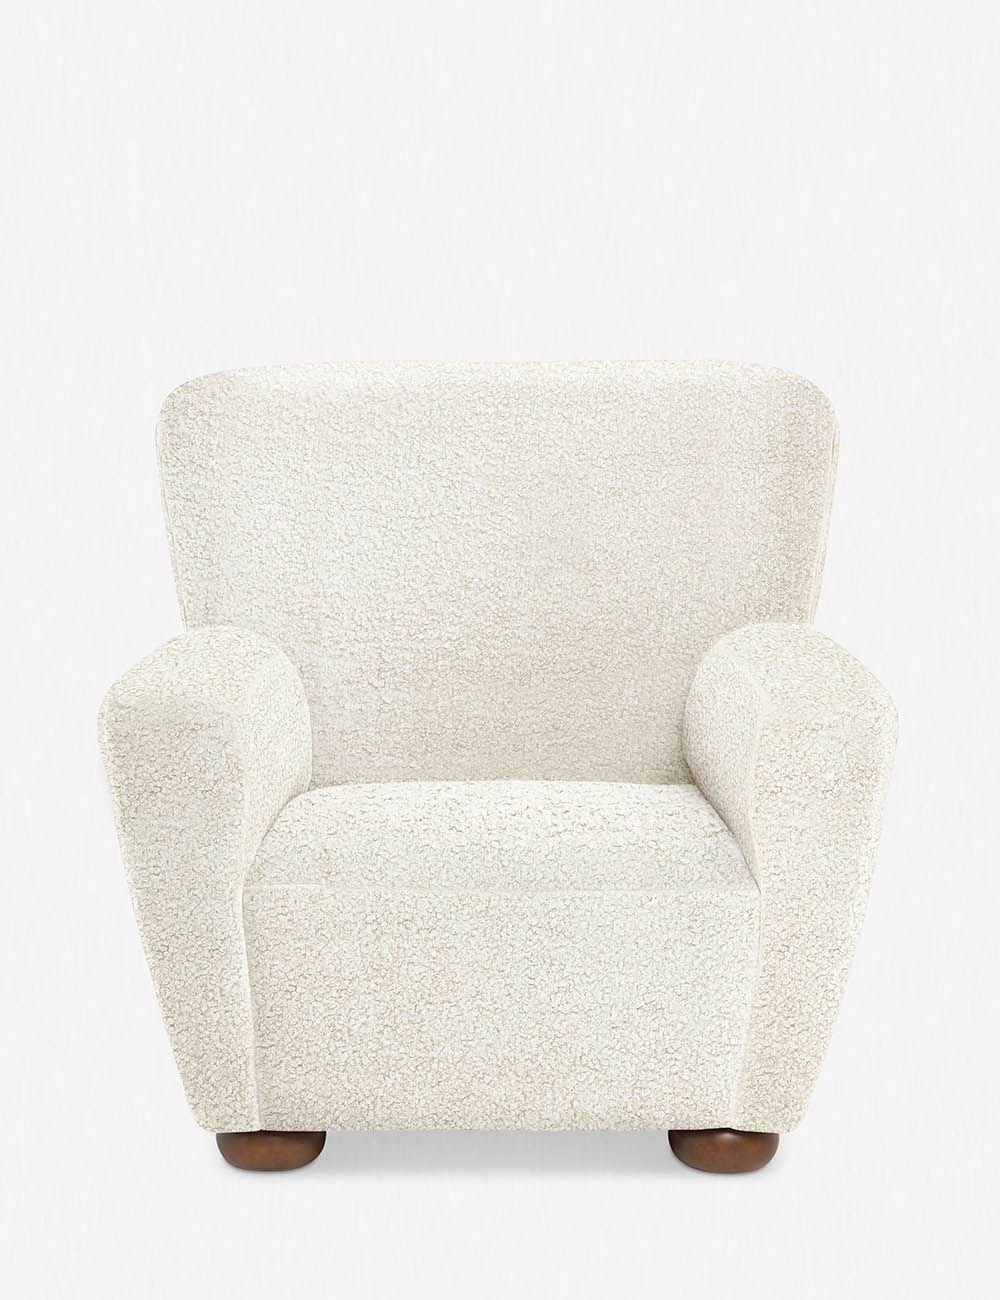 Avery Accent Chair | Lulu and Georgia 